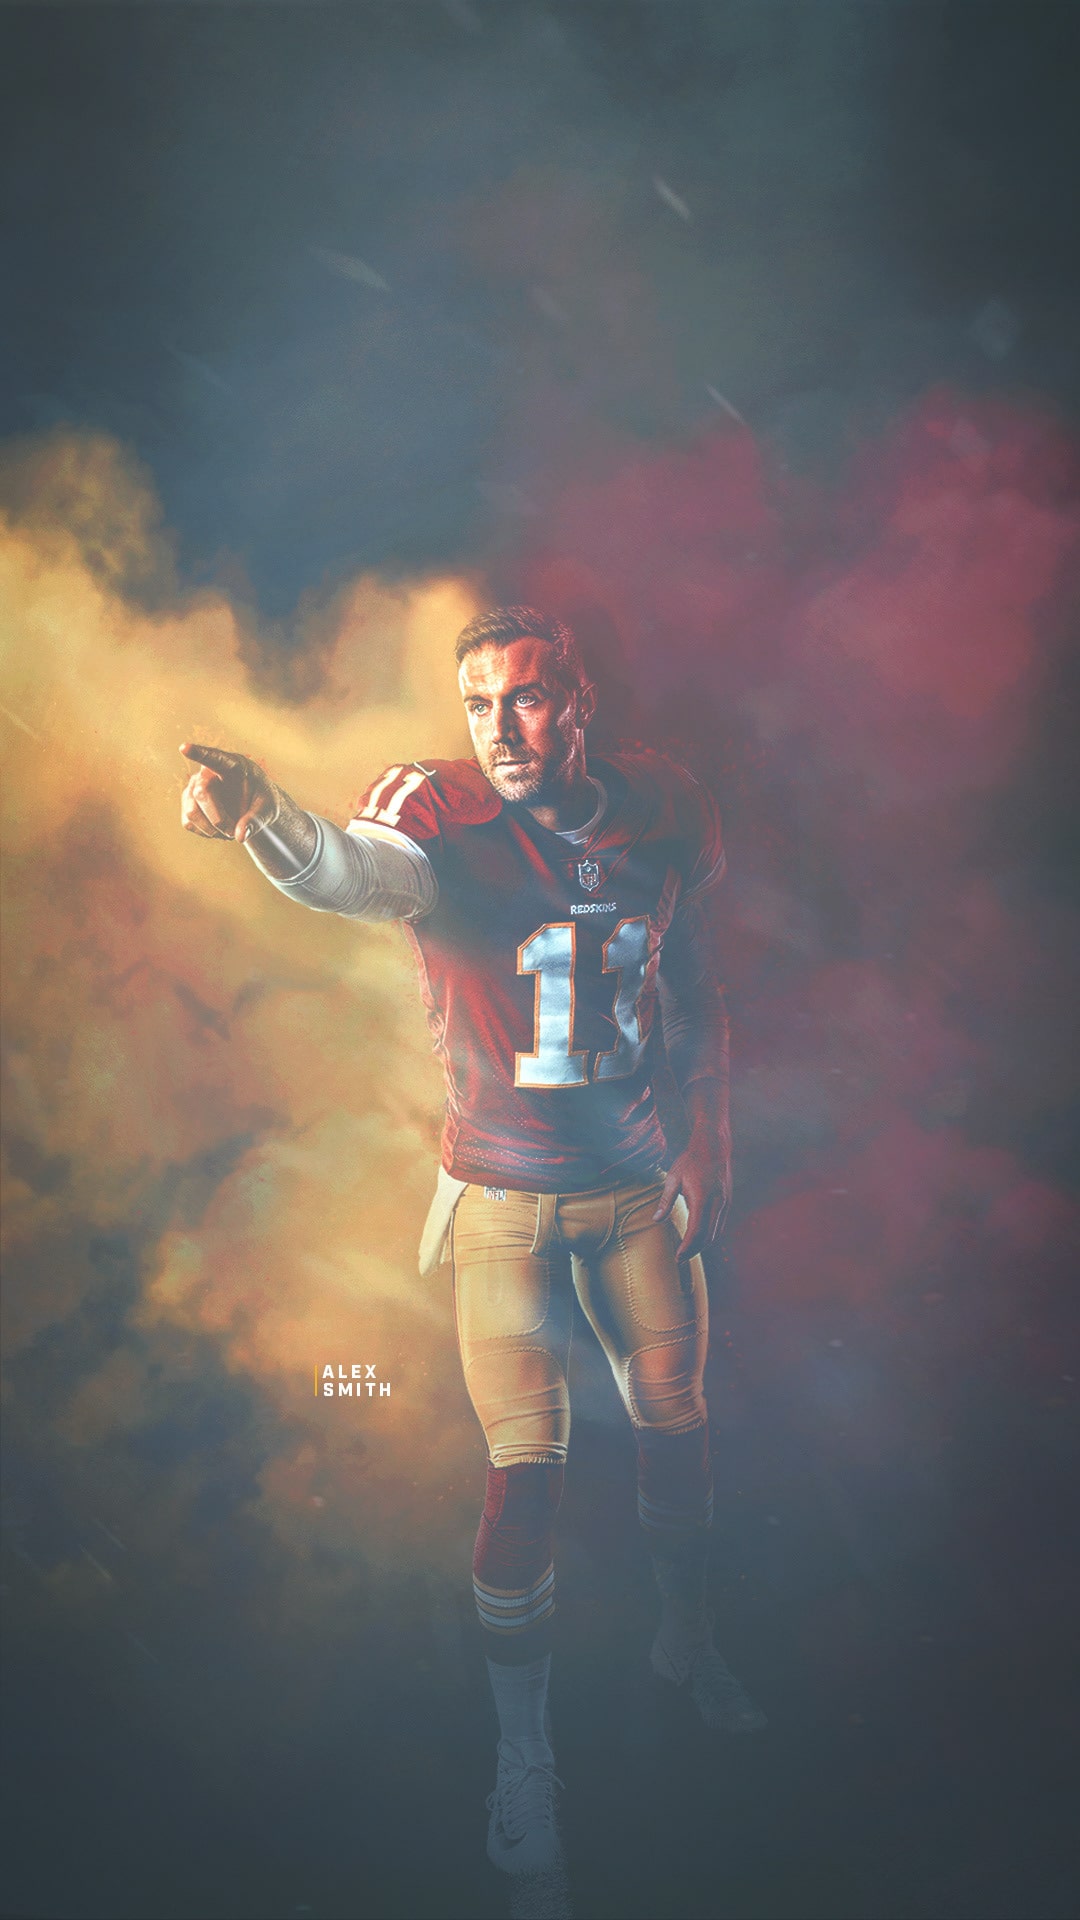 Iphone Alex Smith Wallpaper - KoLPaPer - Awesome Free HD Wallpapers